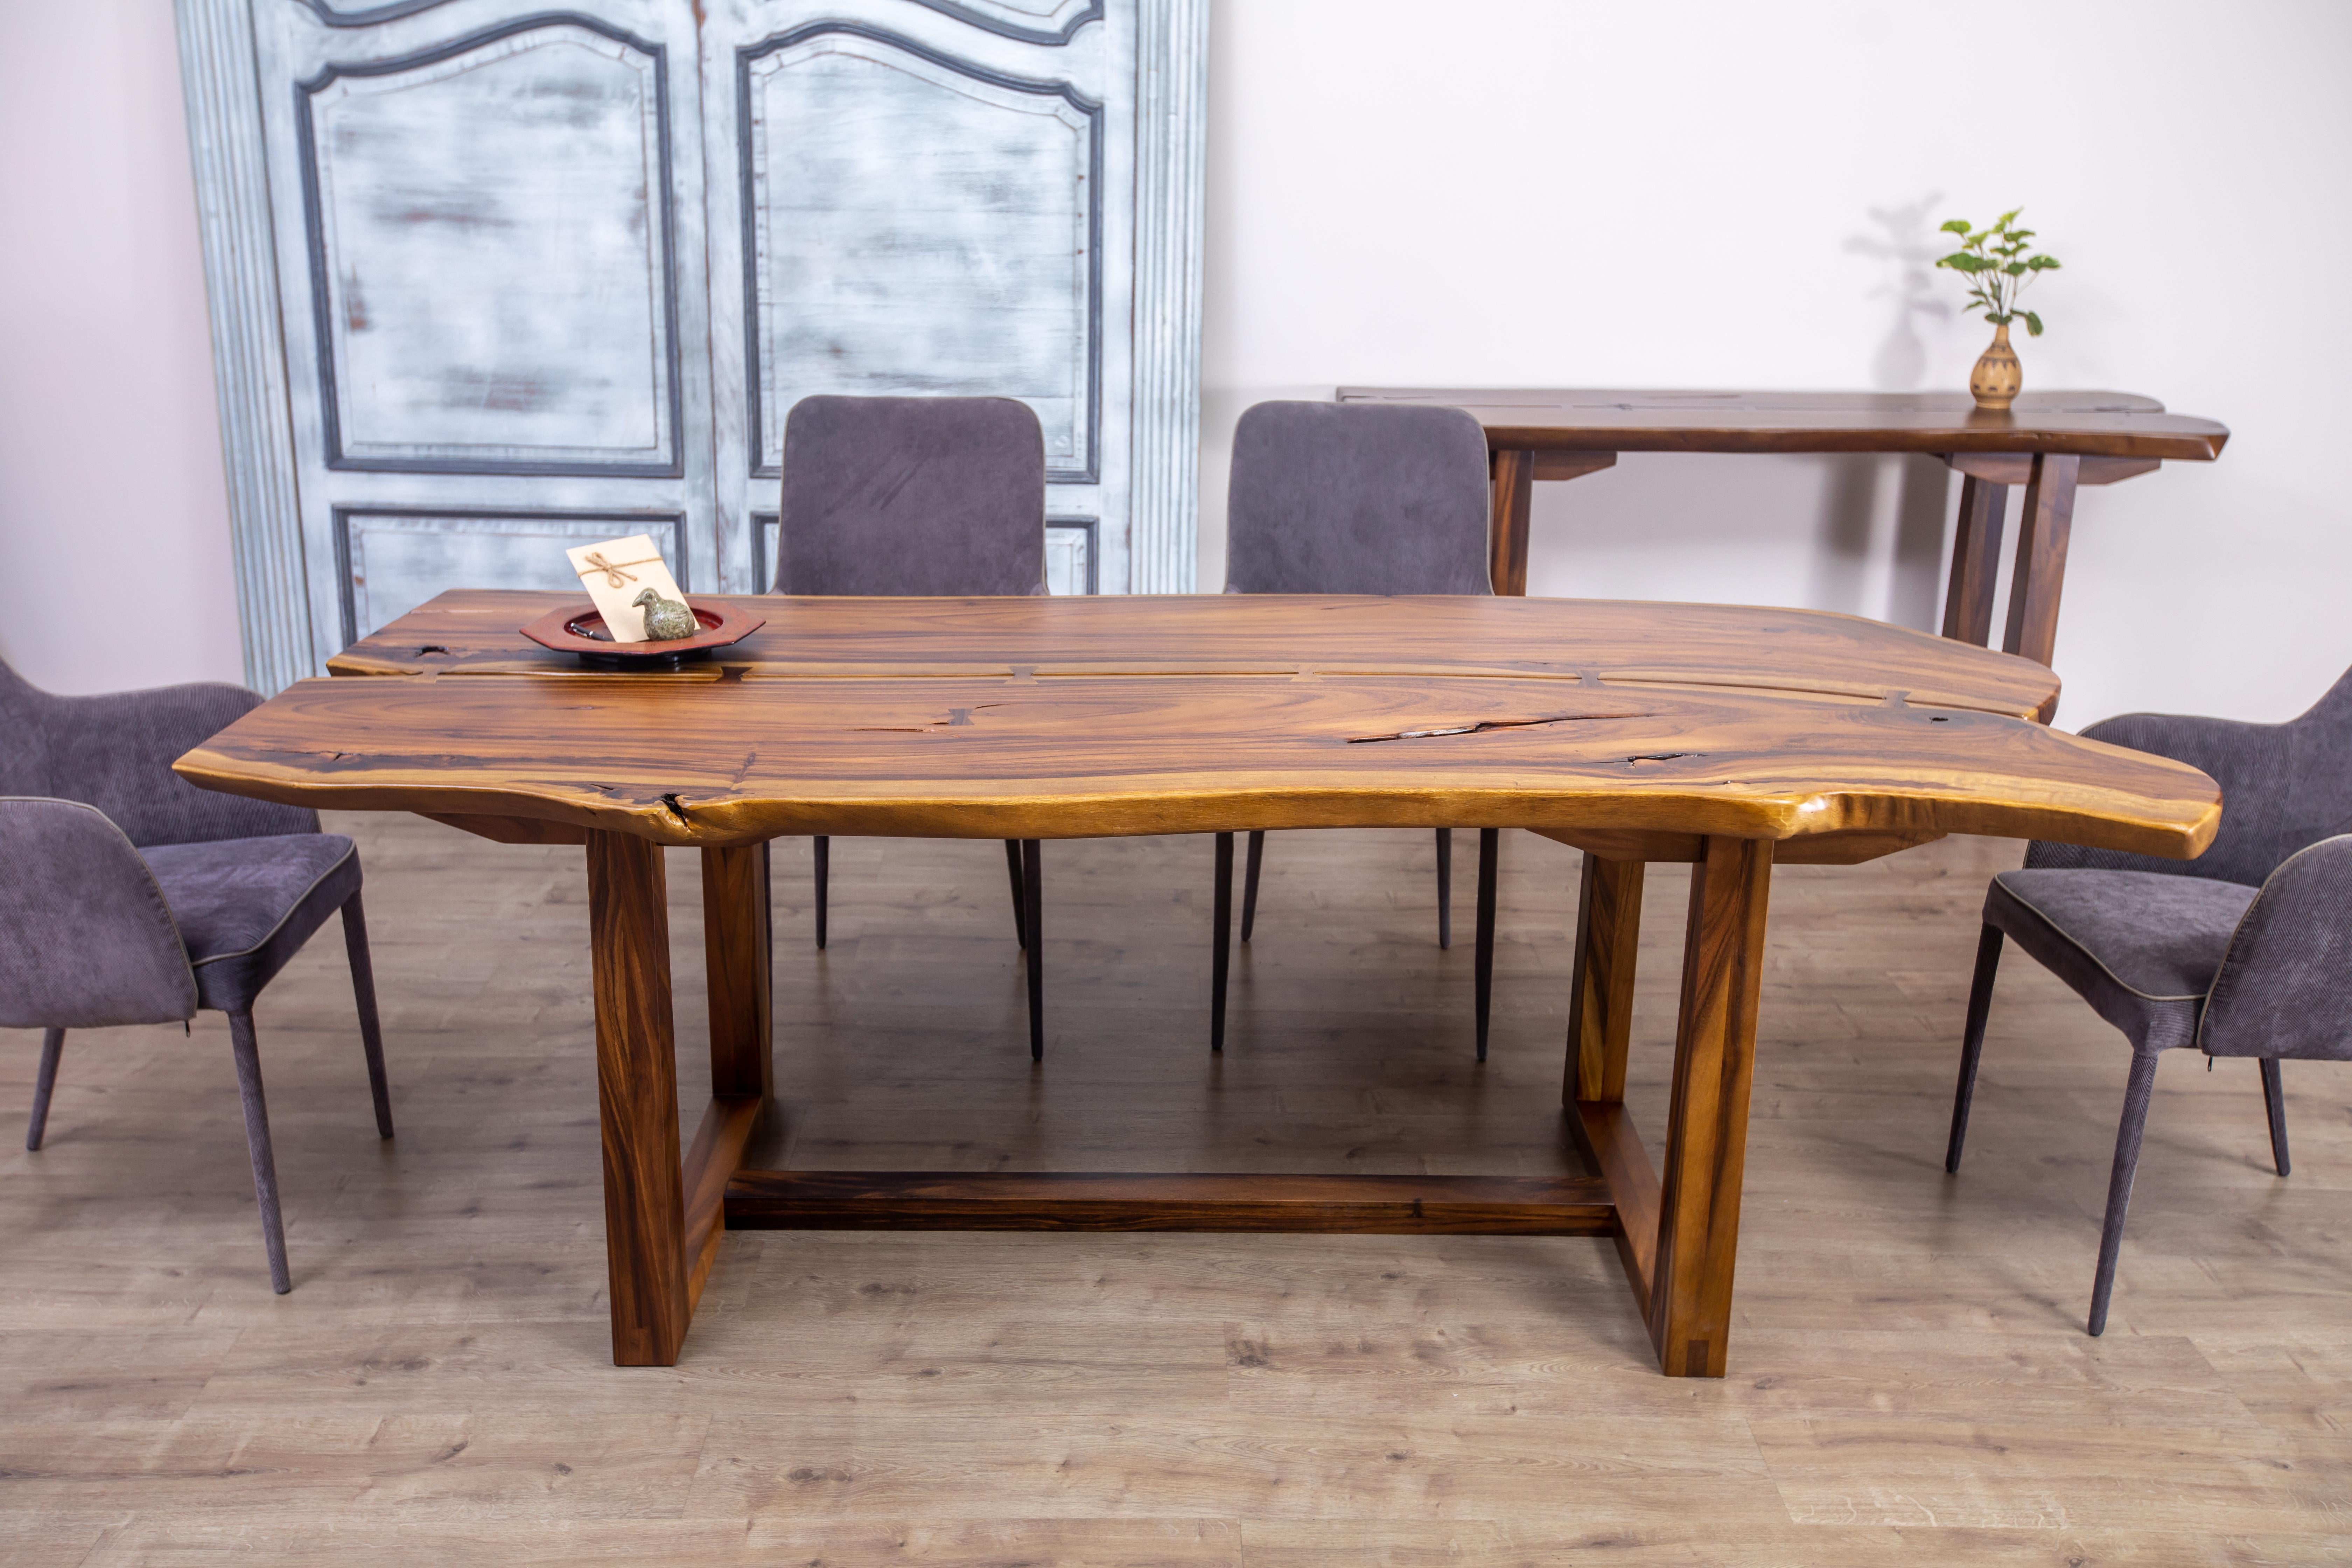 Handcrafted in solid Siam Walnut/Acacia wood the work of Nakashima inspires this 88